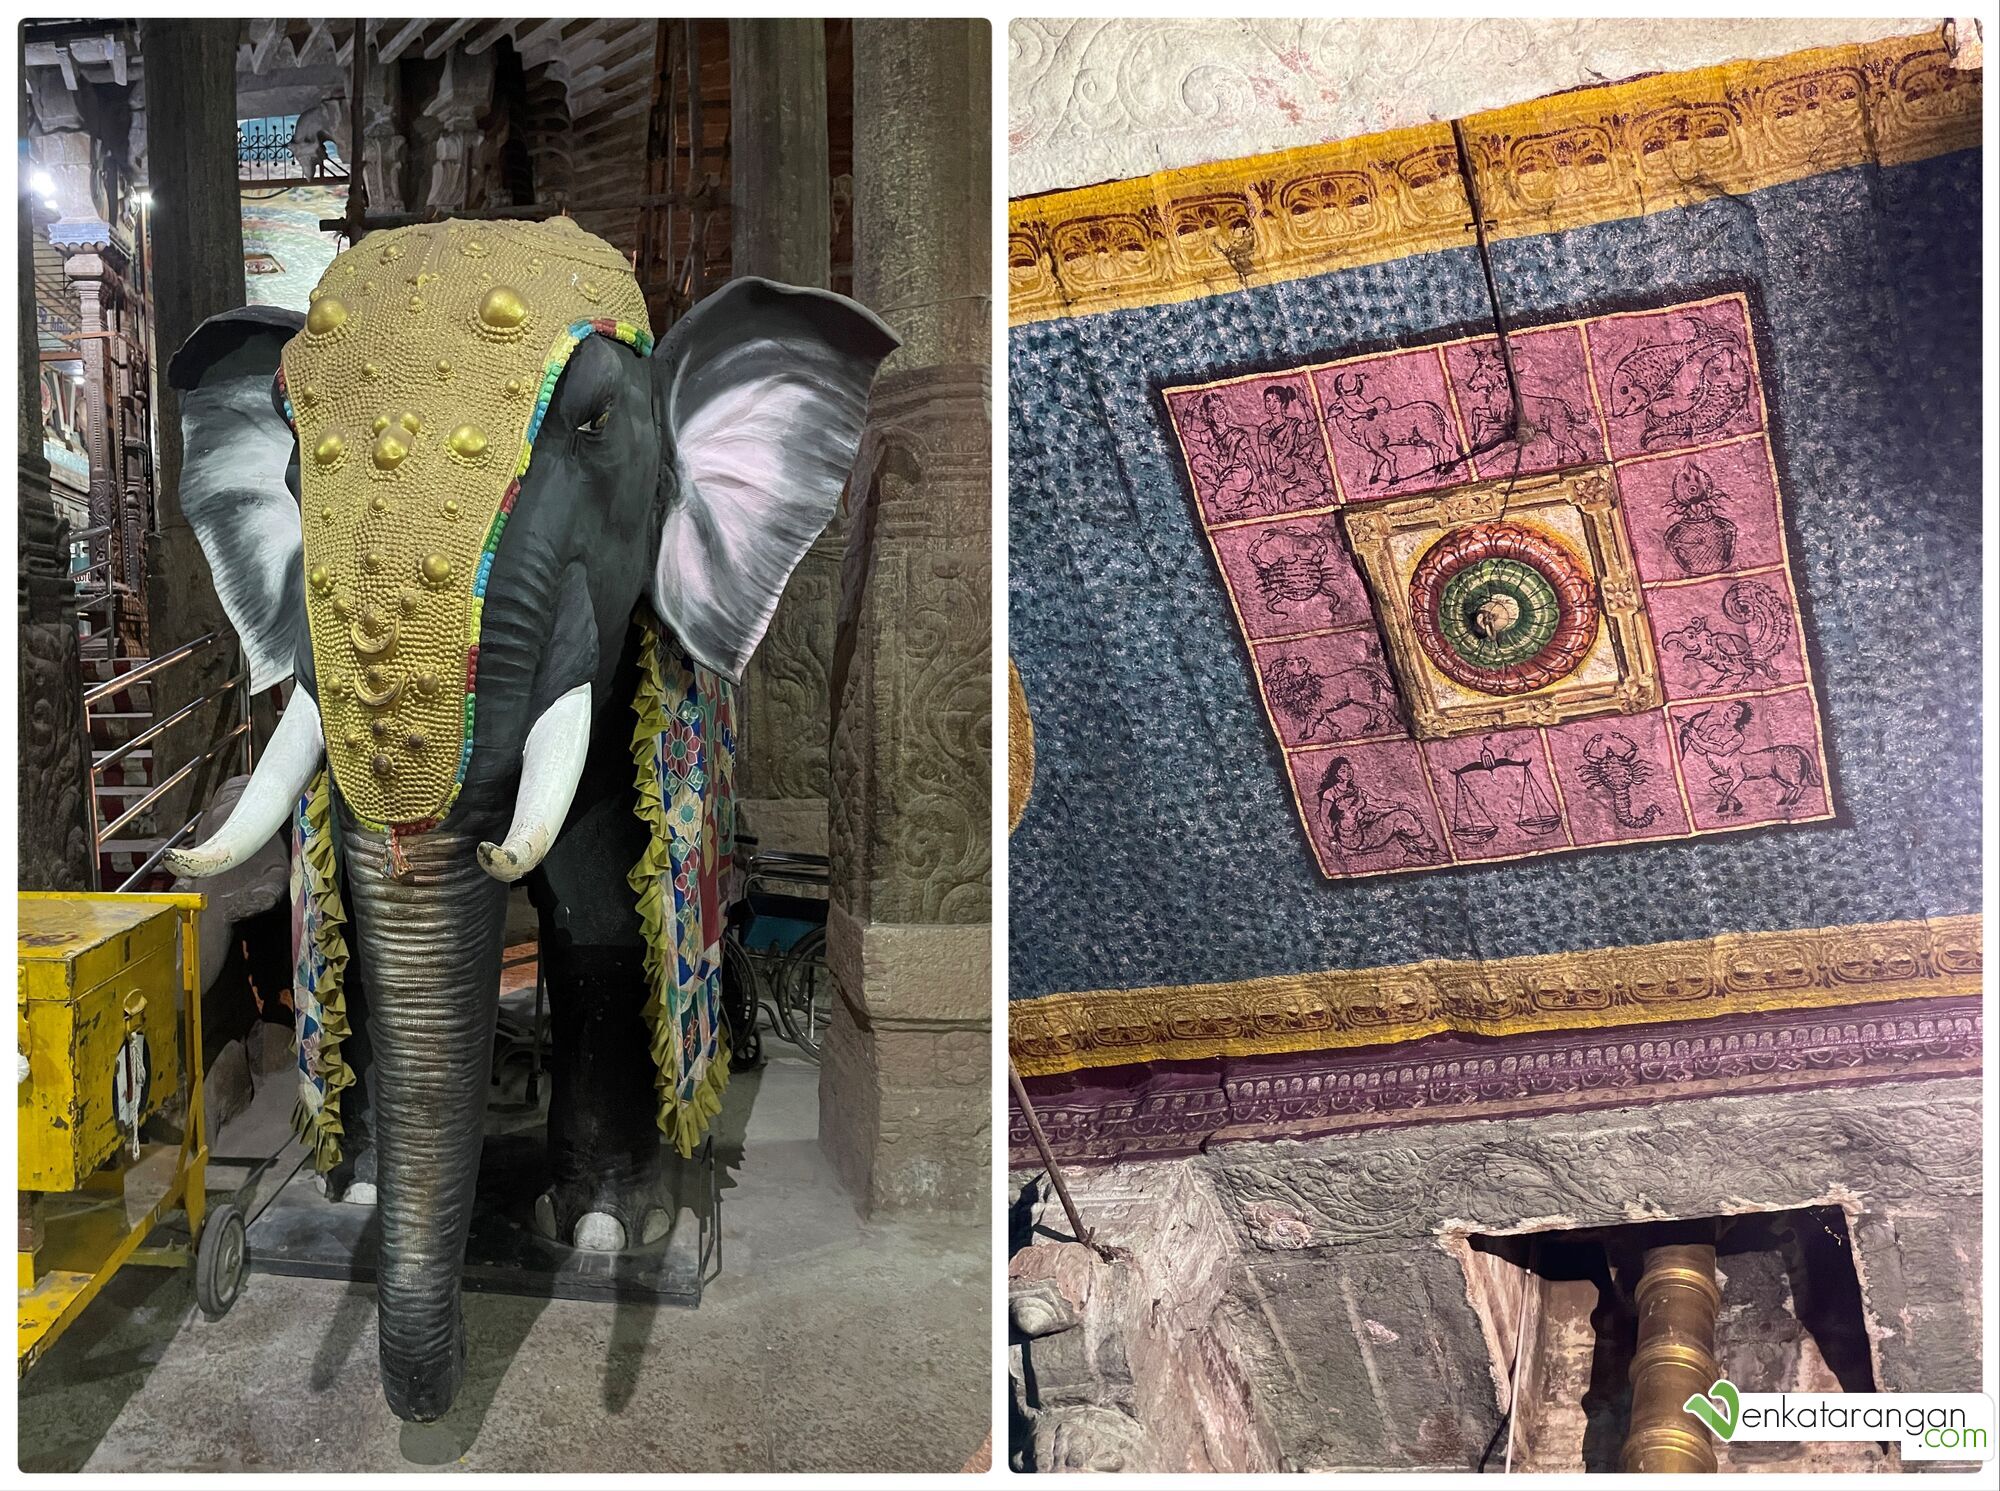 The Temple elephant Mathuravalli who was loved by all, but passed away a few years ago